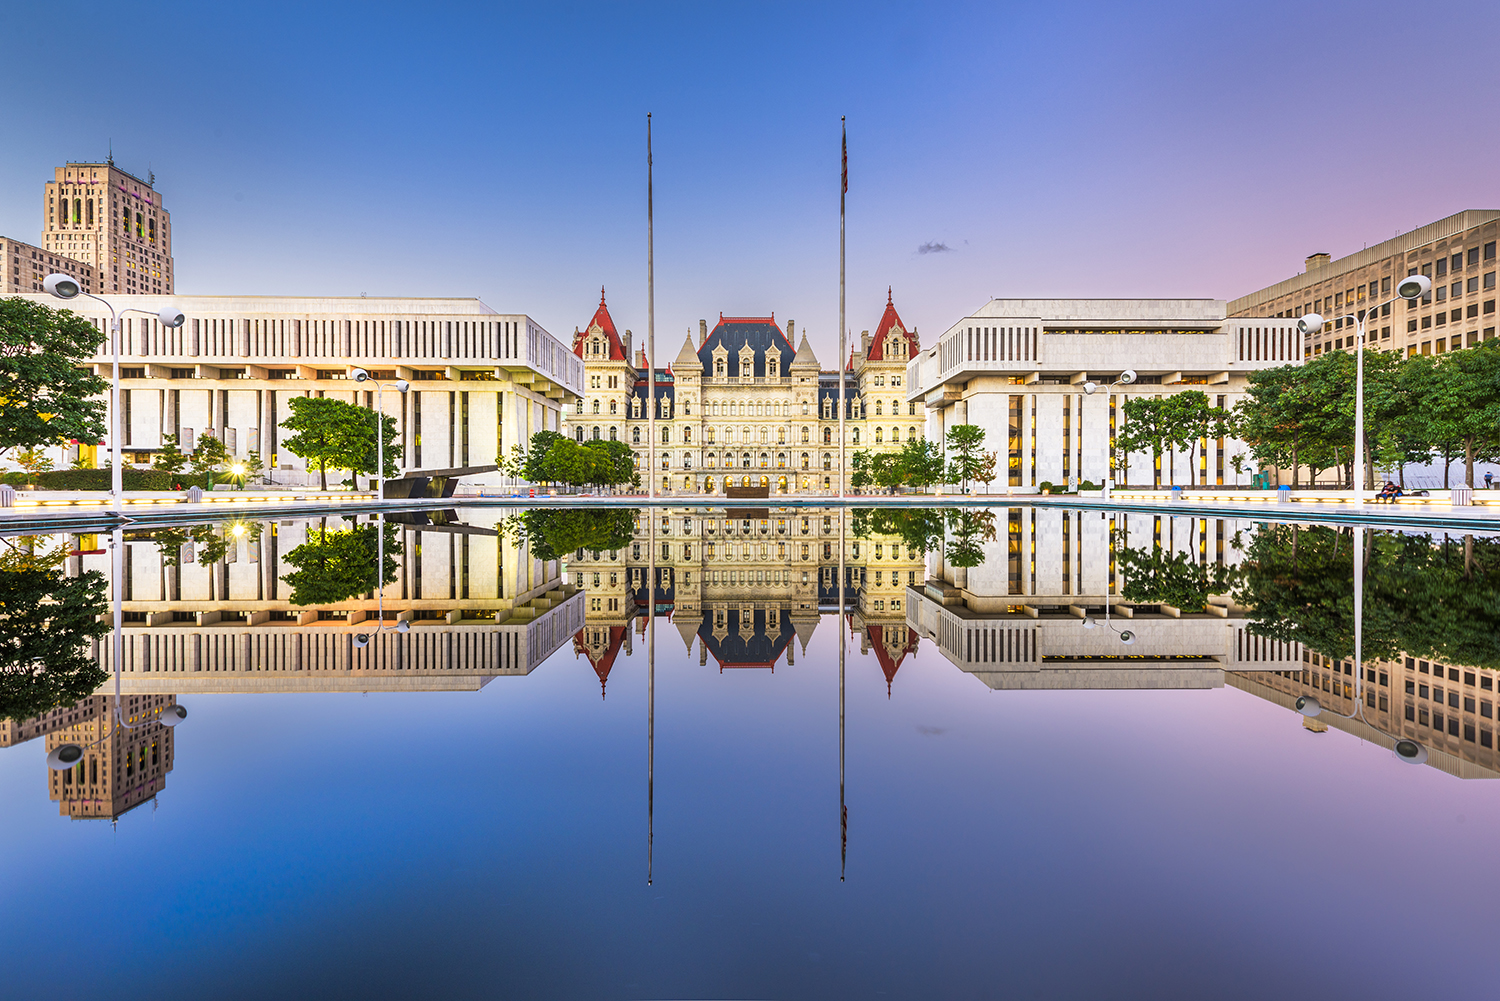 The New York State Legislative buildings are shown reflected in the Reflecting Pool